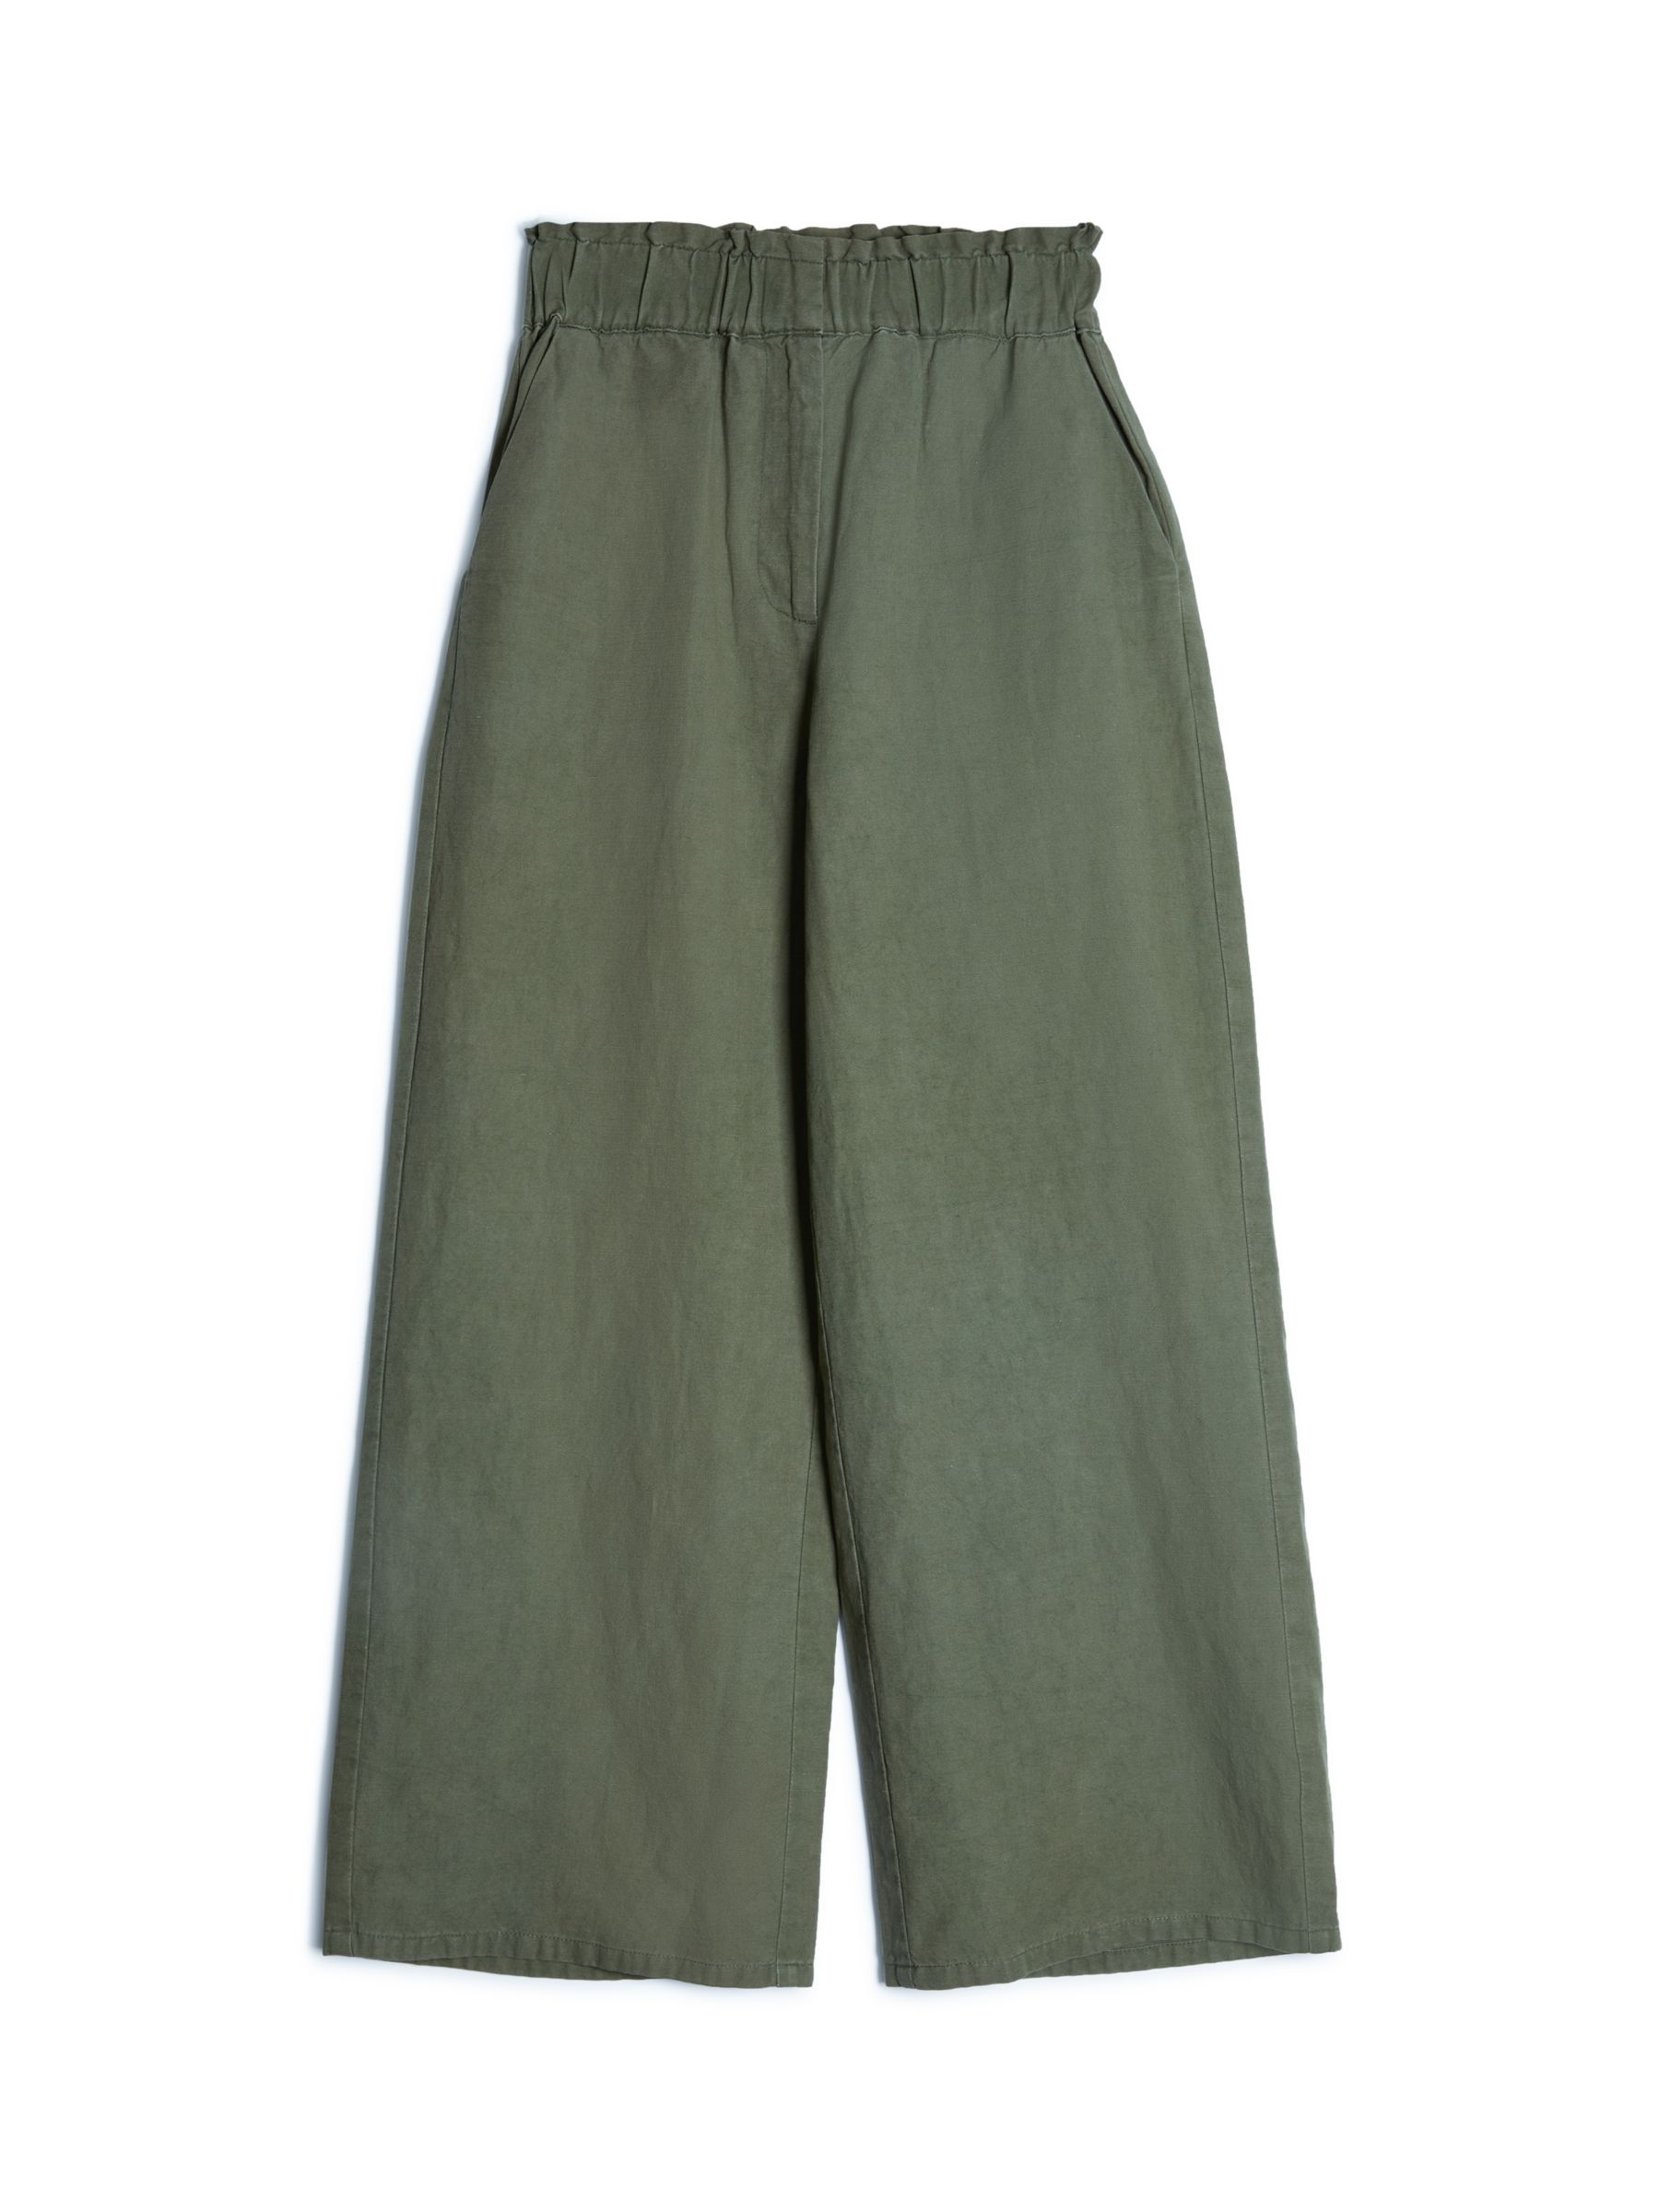 Clearance RYRJJ Womens Casual Loose Cotton Linen Pants Comfy Work Trousers  with Pockets Ruffle Elastic High Waist Tapered Pants(Army Green,XXL) 